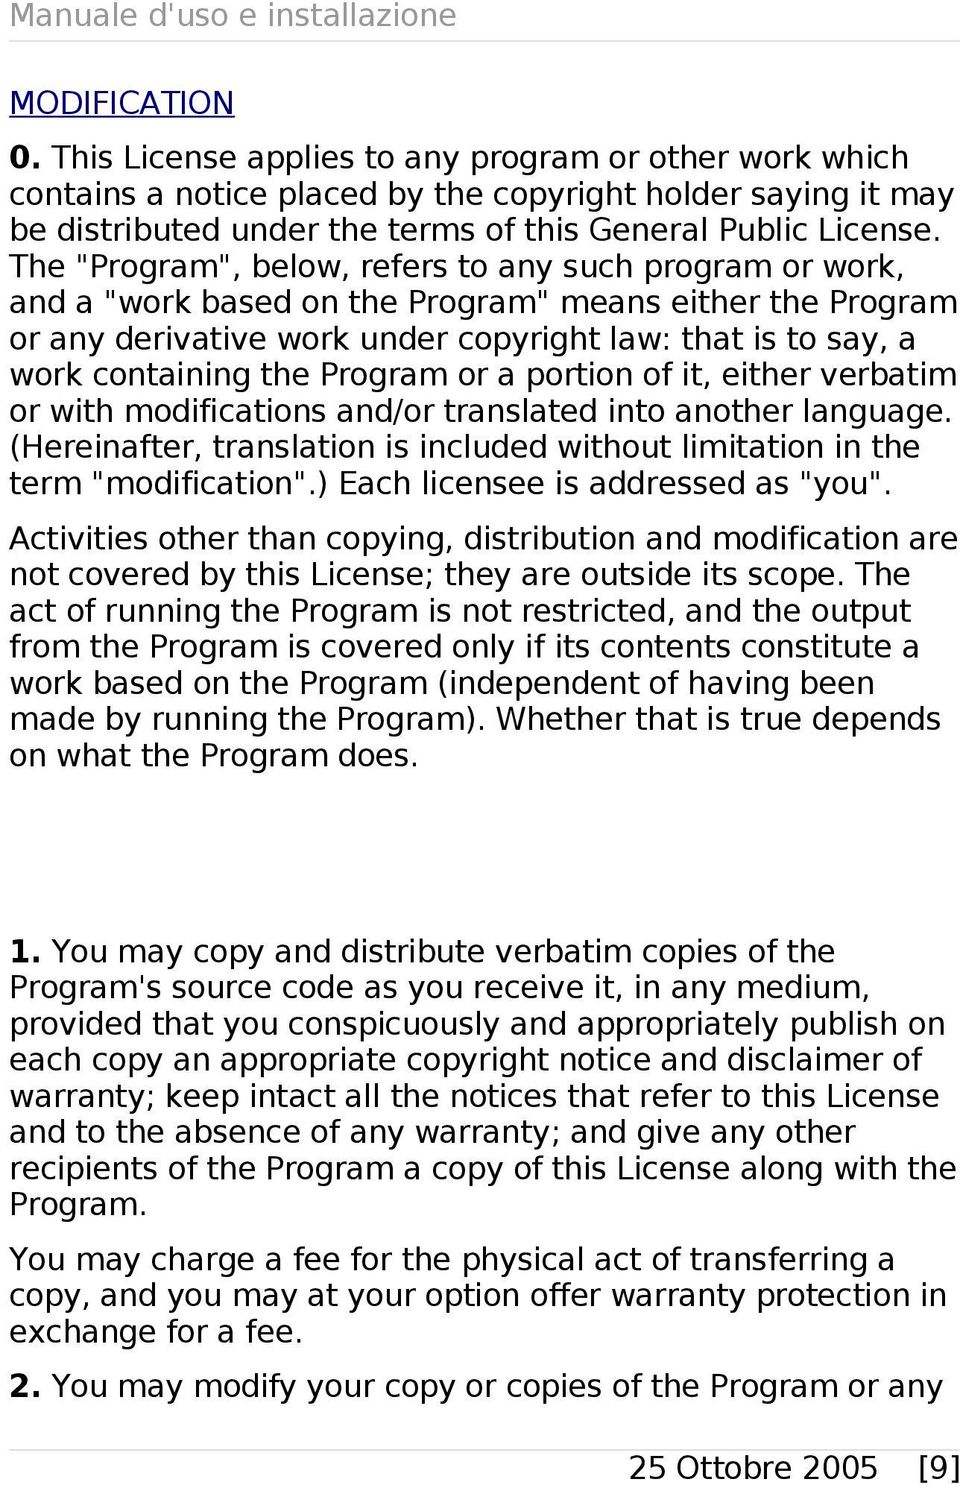 Program or a portion of it, either verbatim or with modifications and/or translated into another language. (Hereinafter, translation is included without limitation in the term "modification".